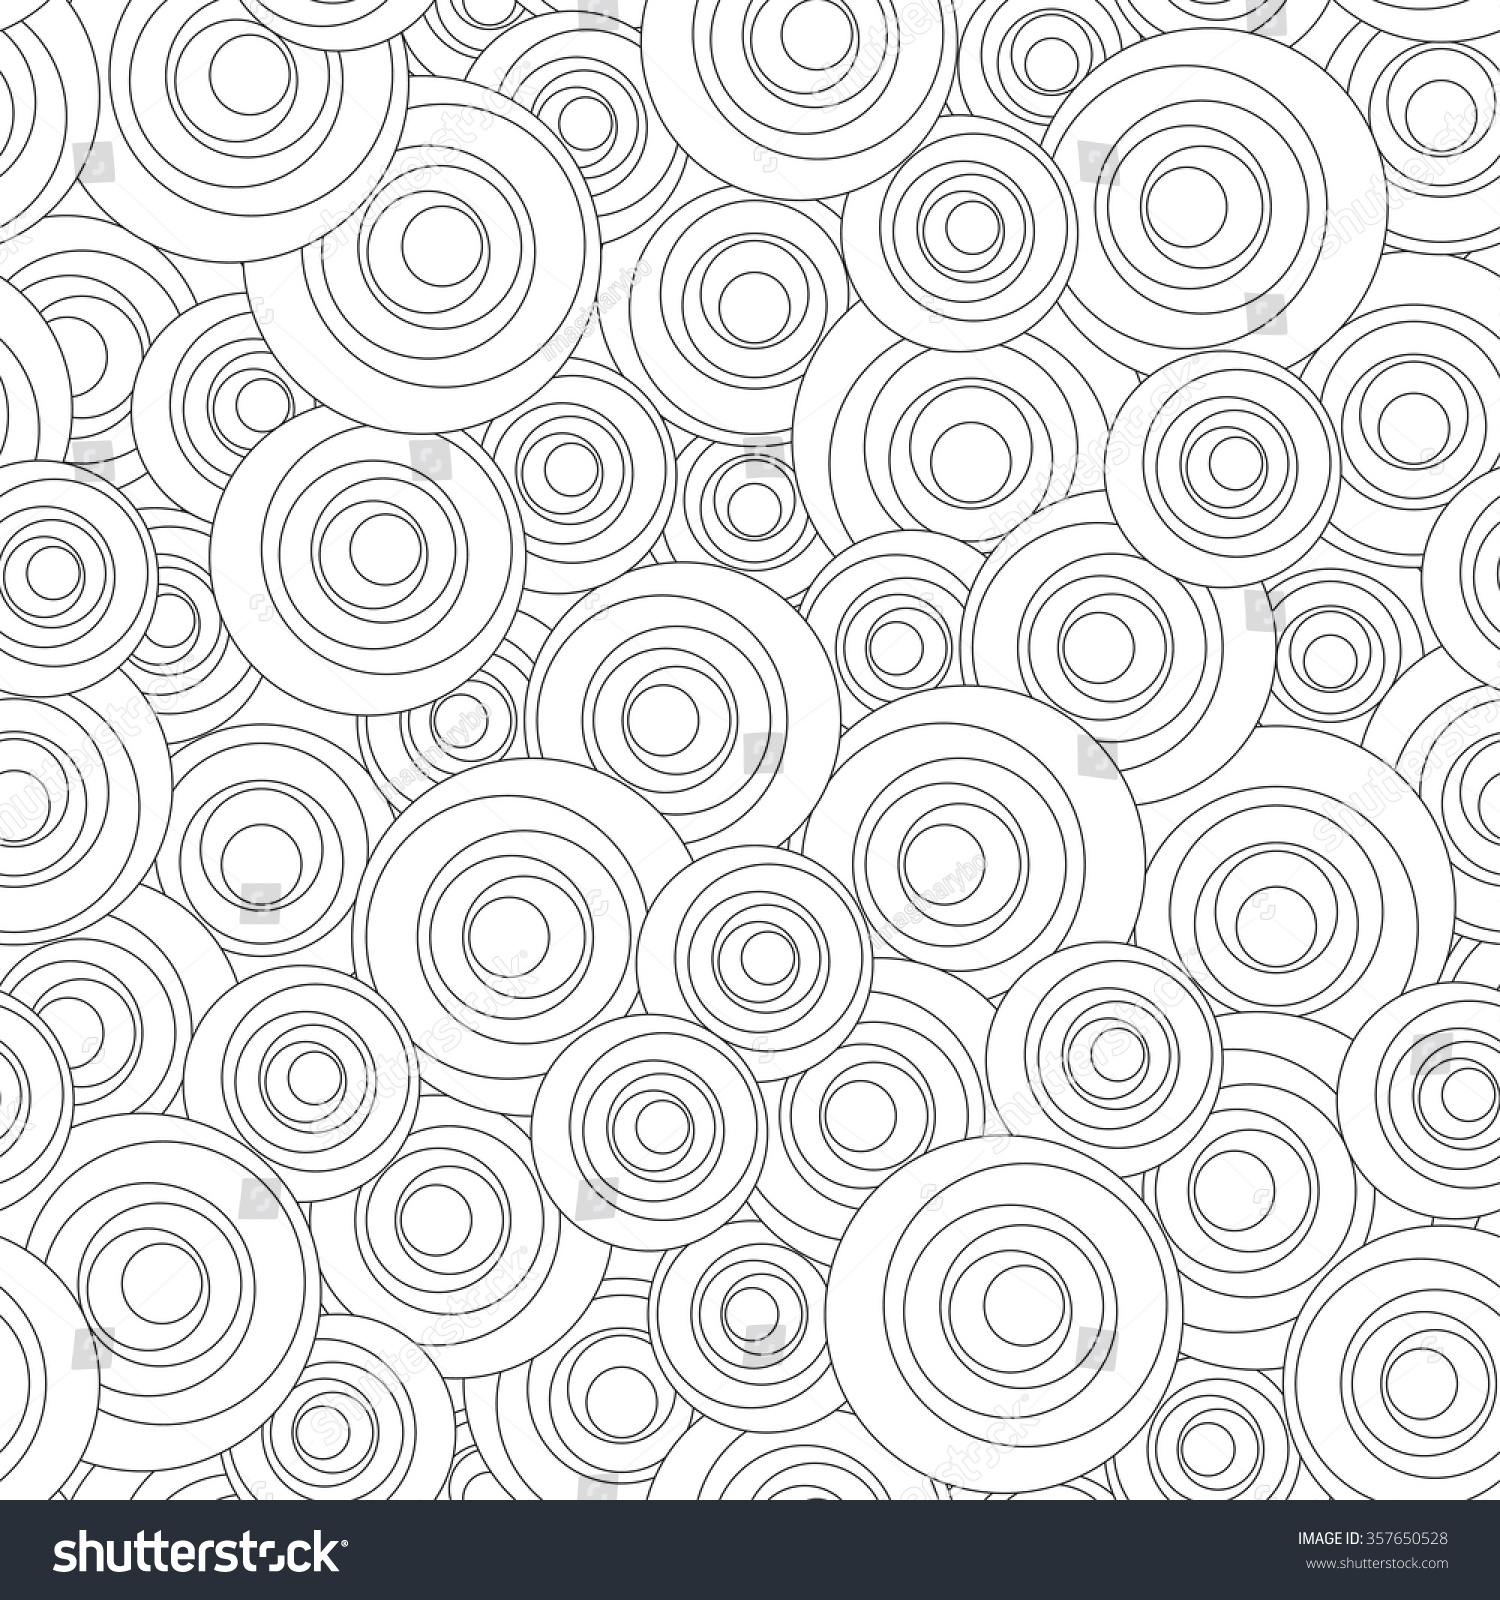 Dimensional Overlapping Circles Seamless Pattern Black Stock Vector ...